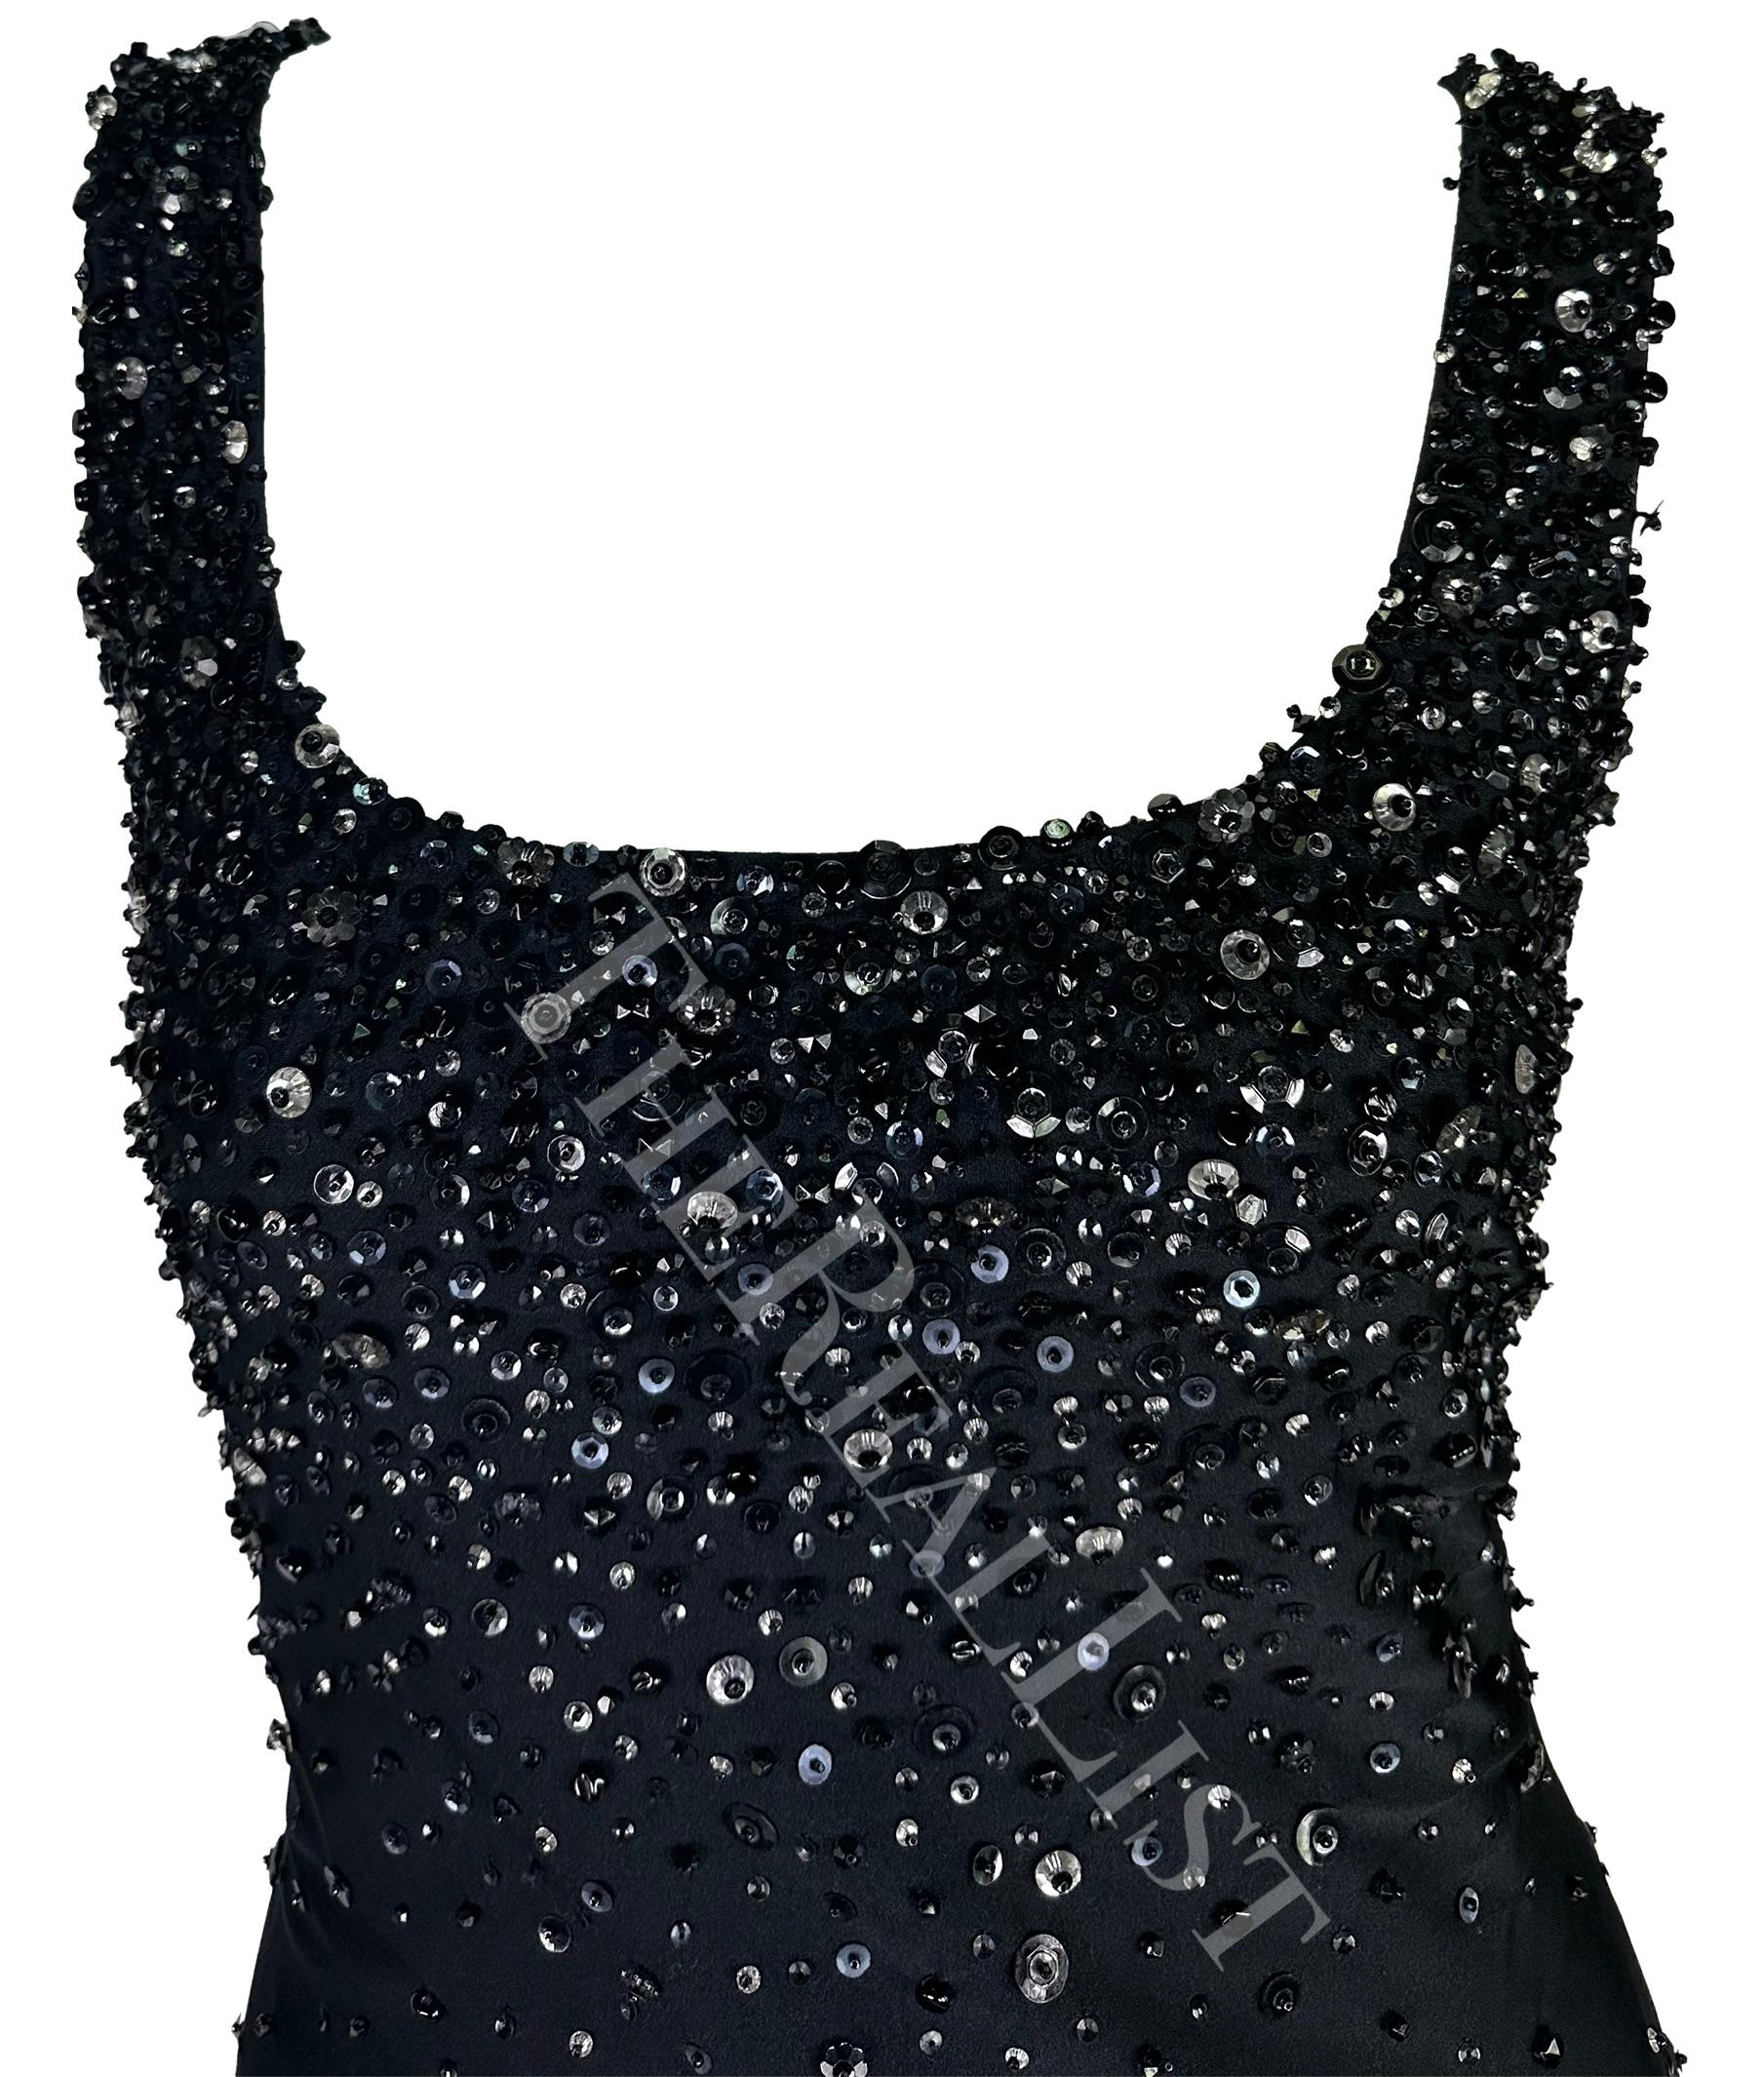 S/S 1996 Gianni Versace Black Beaded Sleeveless Bodycon Runway Dress In Good Condition For Sale In West Hollywood, CA